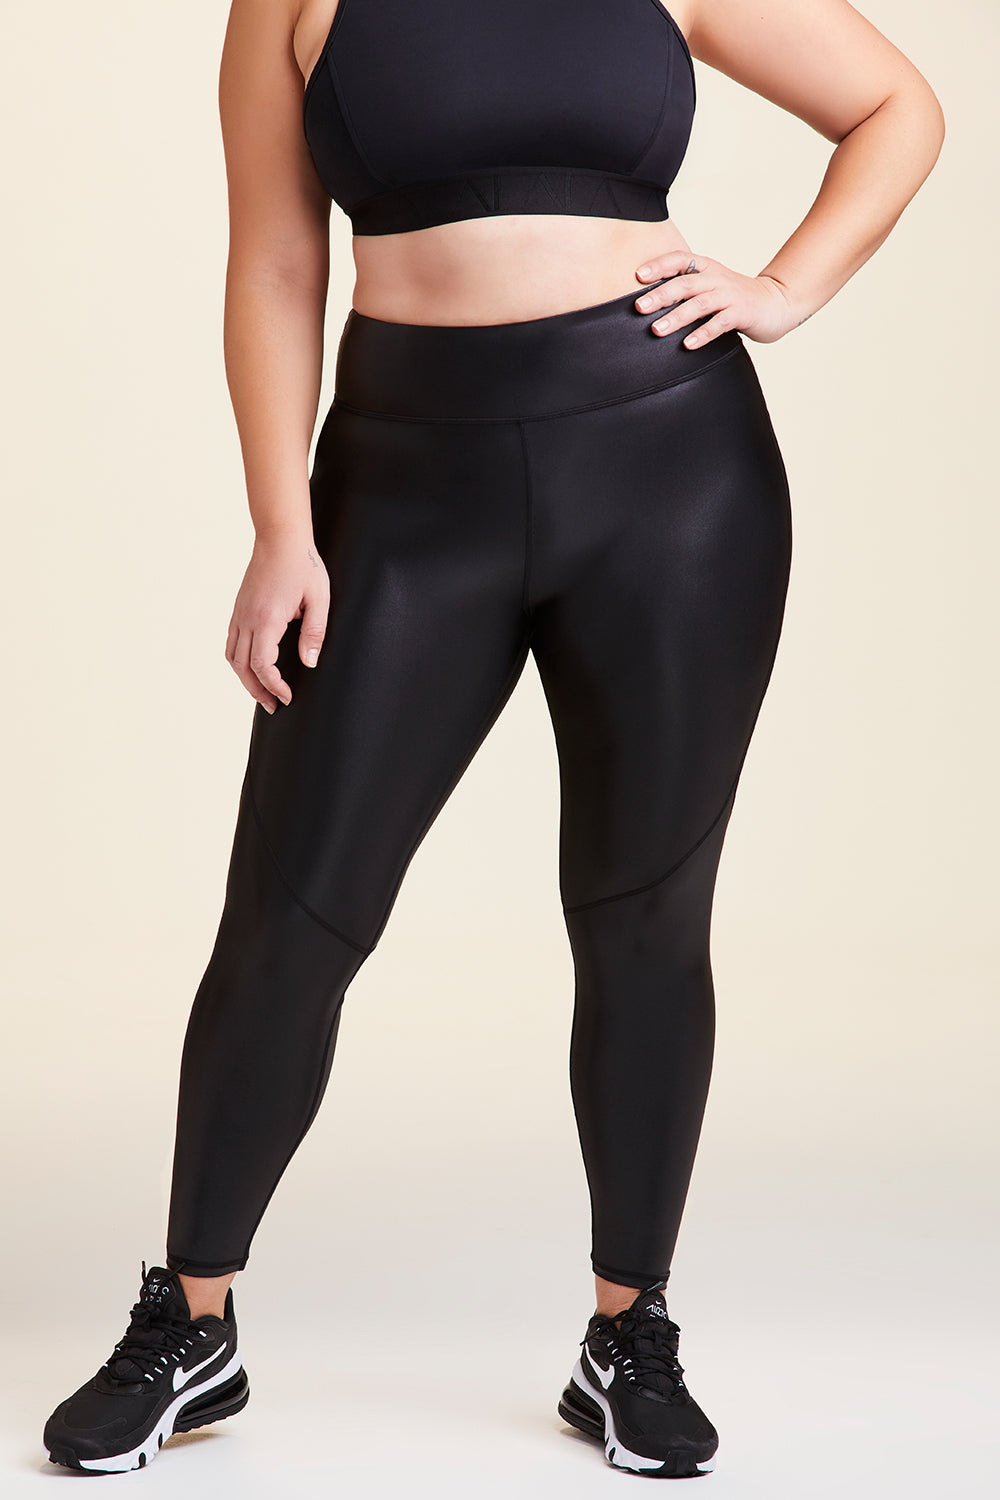 Front view of Alala Women's Luxury Athleisure shiny black tight with mesh paneling on back of knees in plus size